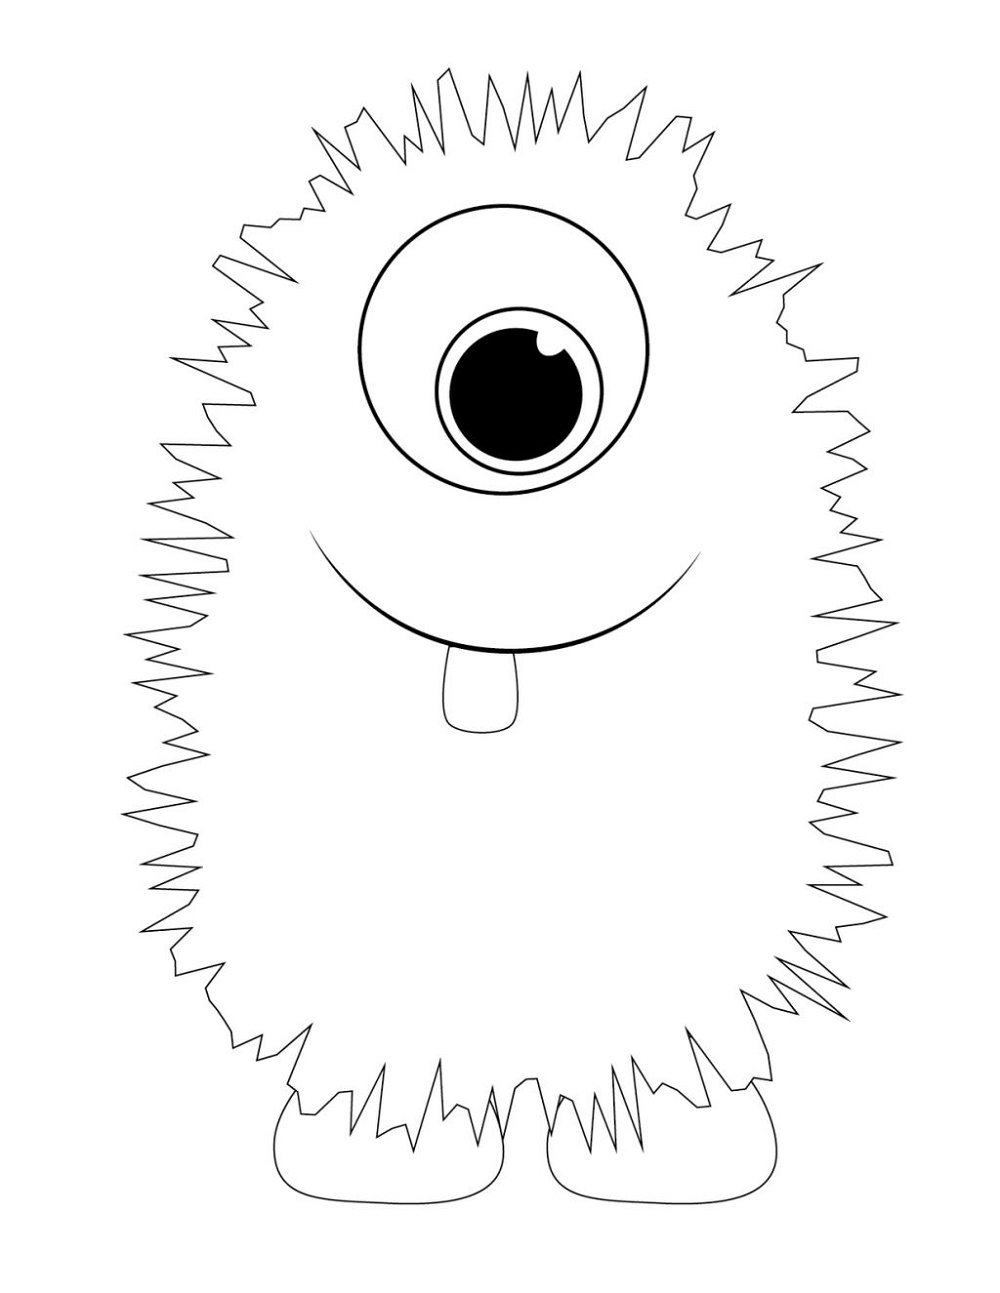 Monster coloring pages free download edutive printable monster coloring pages monster crafts monster birthday parties